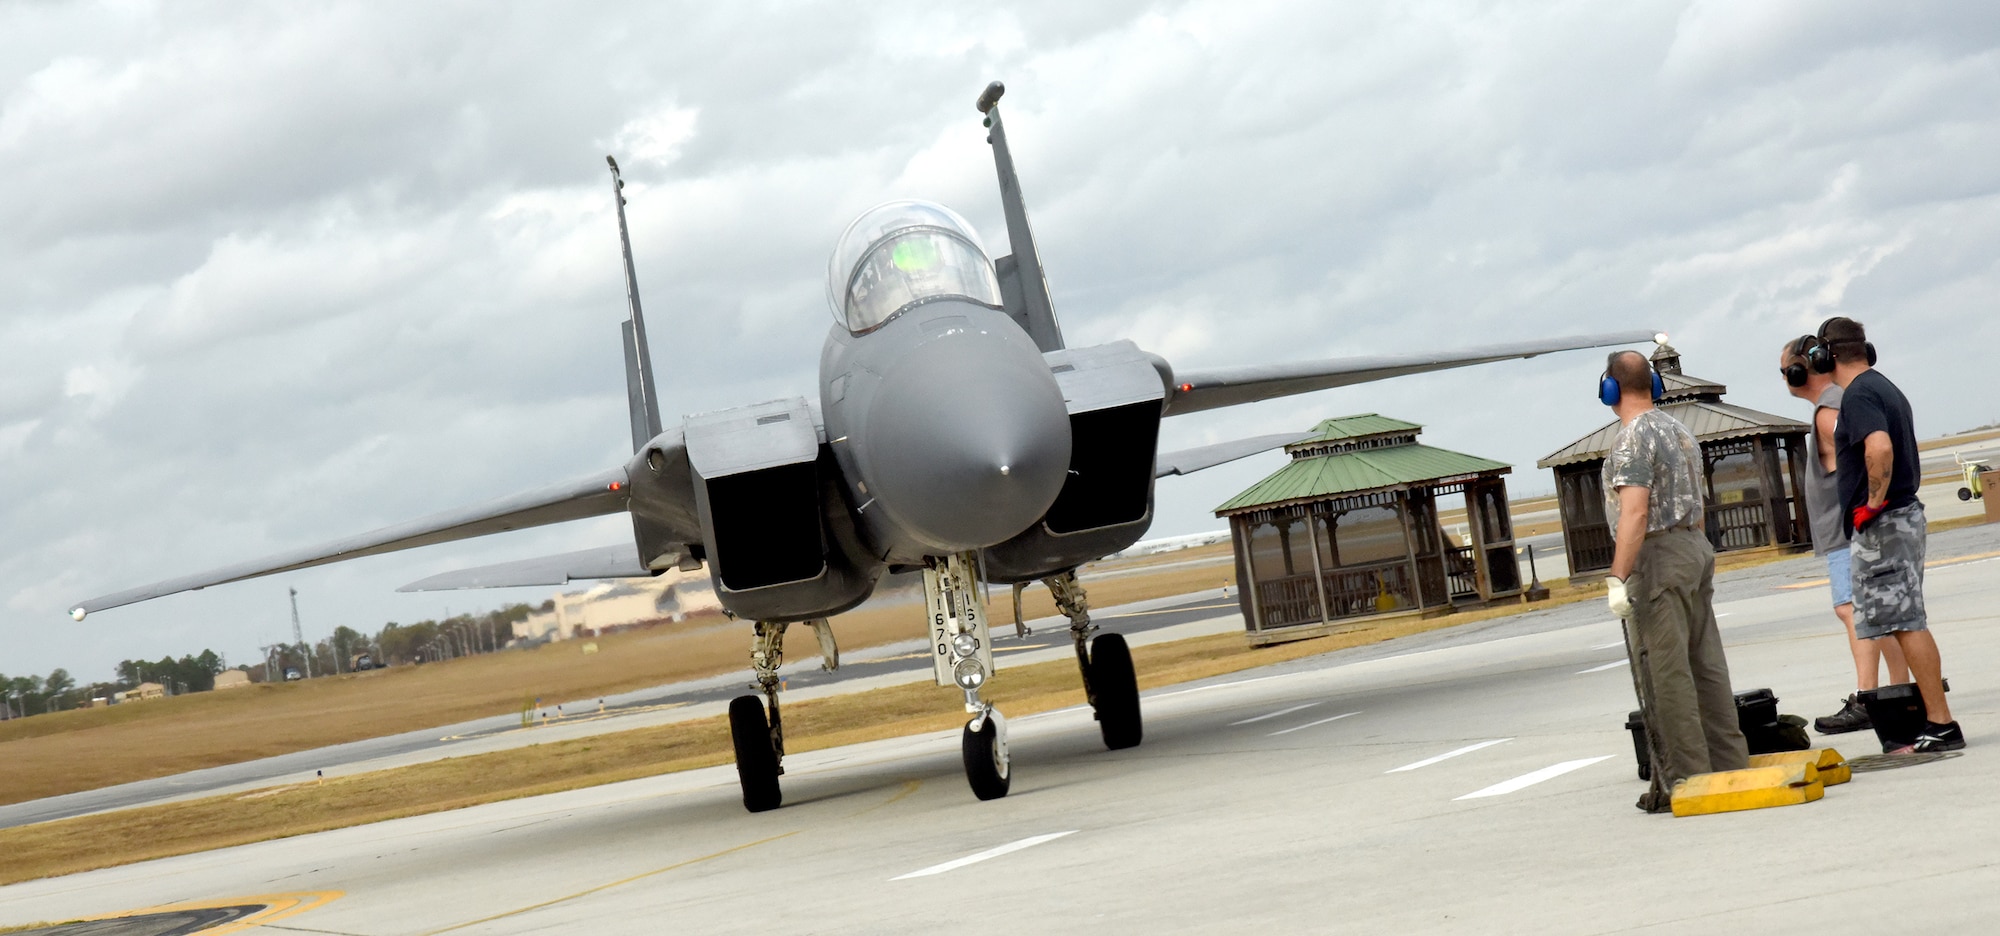 Col. Christopher Sage, 4th Fighter Wing commander taxis his F-15 Strike Eagle from Seymour Johnson Air Force Base, North Carolina, onto the flight line at Robins Air Force Base. Sage brought the F-15 to Robins for Programmed  Depot Maintenance. (U.S. Air Force photo by Ed Aspera)